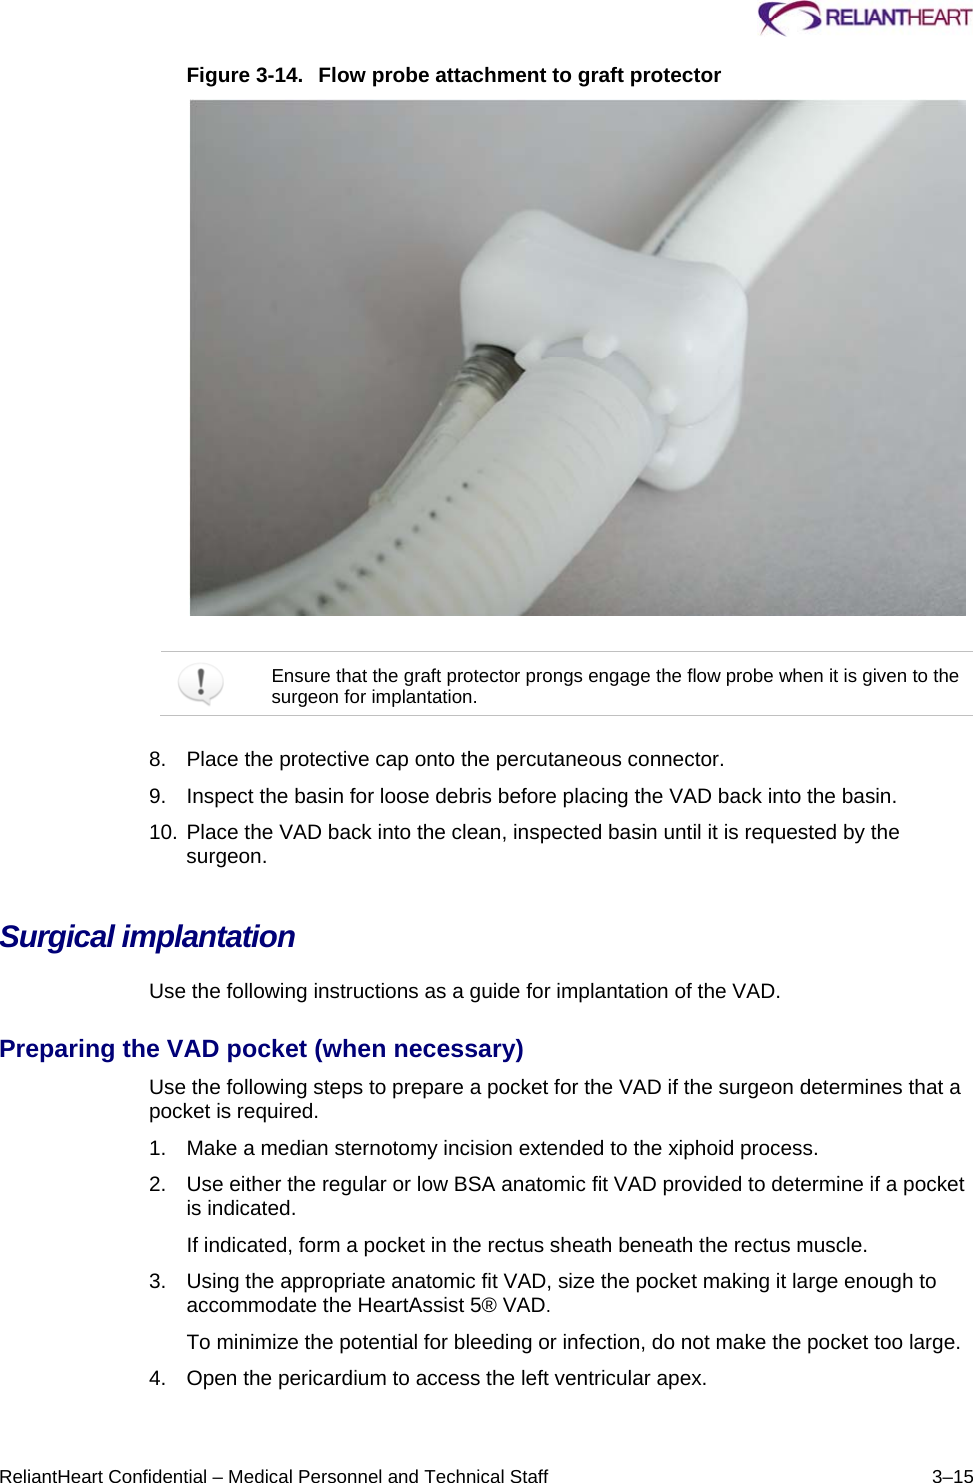     ReliantHeart Confidential – Medical Personnel and Technical Staff  3–15 Figure 3-14.  Flow probe attachment to graft protector     Ensure that the graft protector prongs engage the flow probe when it is given to the surgeon for implantation.  8.  Place the protective cap onto the percutaneous connector.  9.  Inspect the basin for loose debris before placing the VAD back into the basin.  10. Place the VAD back into the clean, inspected basin until it is requested by the surgeon. Surgical implantation  Use the following instructions as a guide for implantation of the VAD.  Preparing the VAD pocket (when necessary)  Use the following steps to prepare a pocket for the VAD if the surgeon determines that a pocket is required.  1.  Make a median sternotomy incision extended to the xiphoid process.  2.  Use either the regular or low BSA anatomic fit VAD provided to determine if a pocket is indicated.  If indicated, form a pocket in the rectus sheath beneath the rectus muscle.  3.  Using the appropriate anatomic fit VAD, size the pocket making it large enough to accommodate the HeartAssist 5® VAD.  To minimize the potential for bleeding or infection, do not make the pocket too large.  4.  Open the pericardium to access the left ventricular apex.  